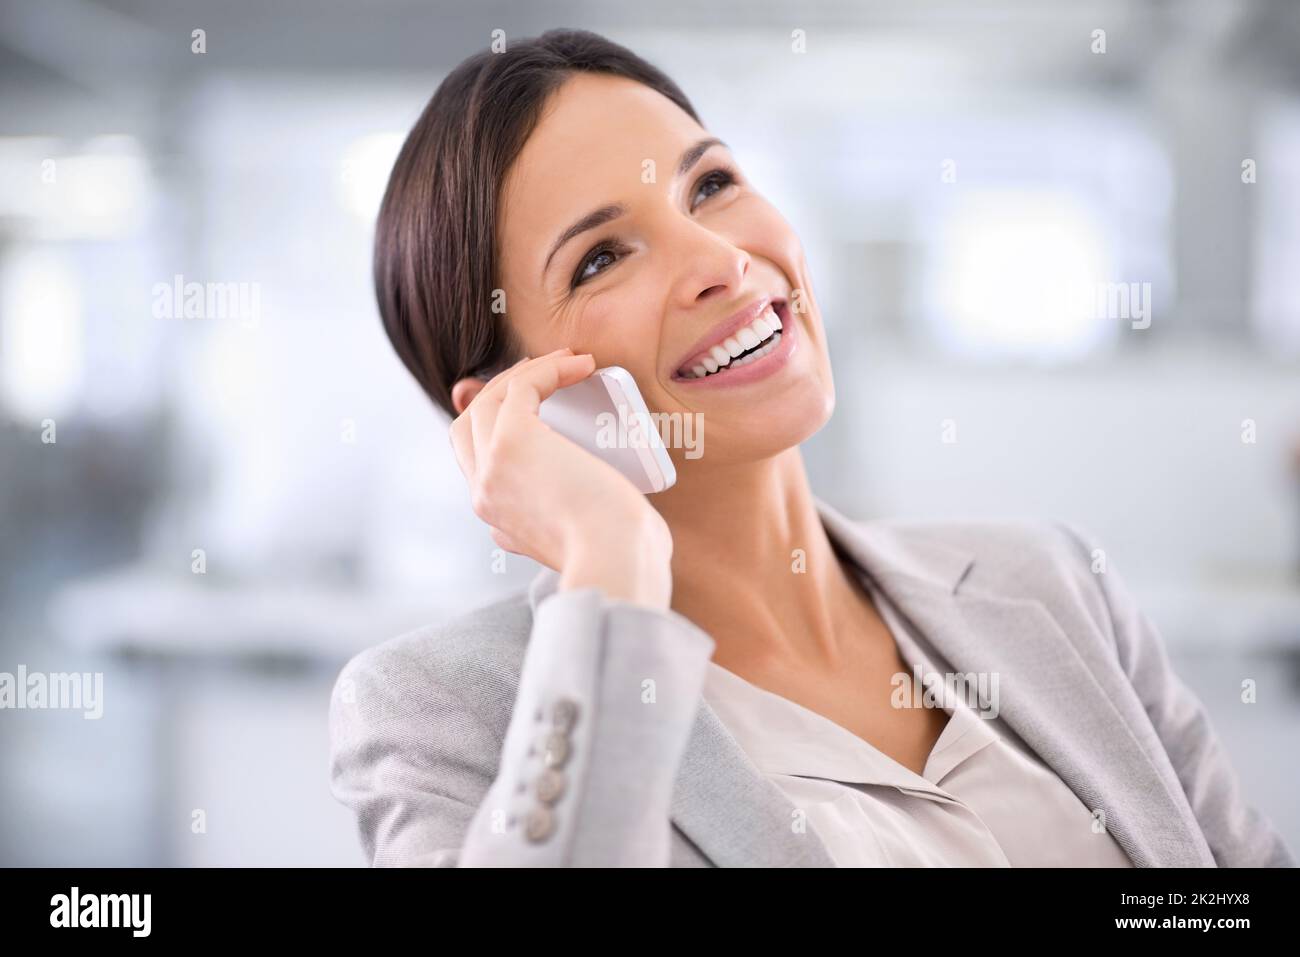 She's always available. Shot of a woman using a cellphone while sitting at a desk in an office. Stock Photo